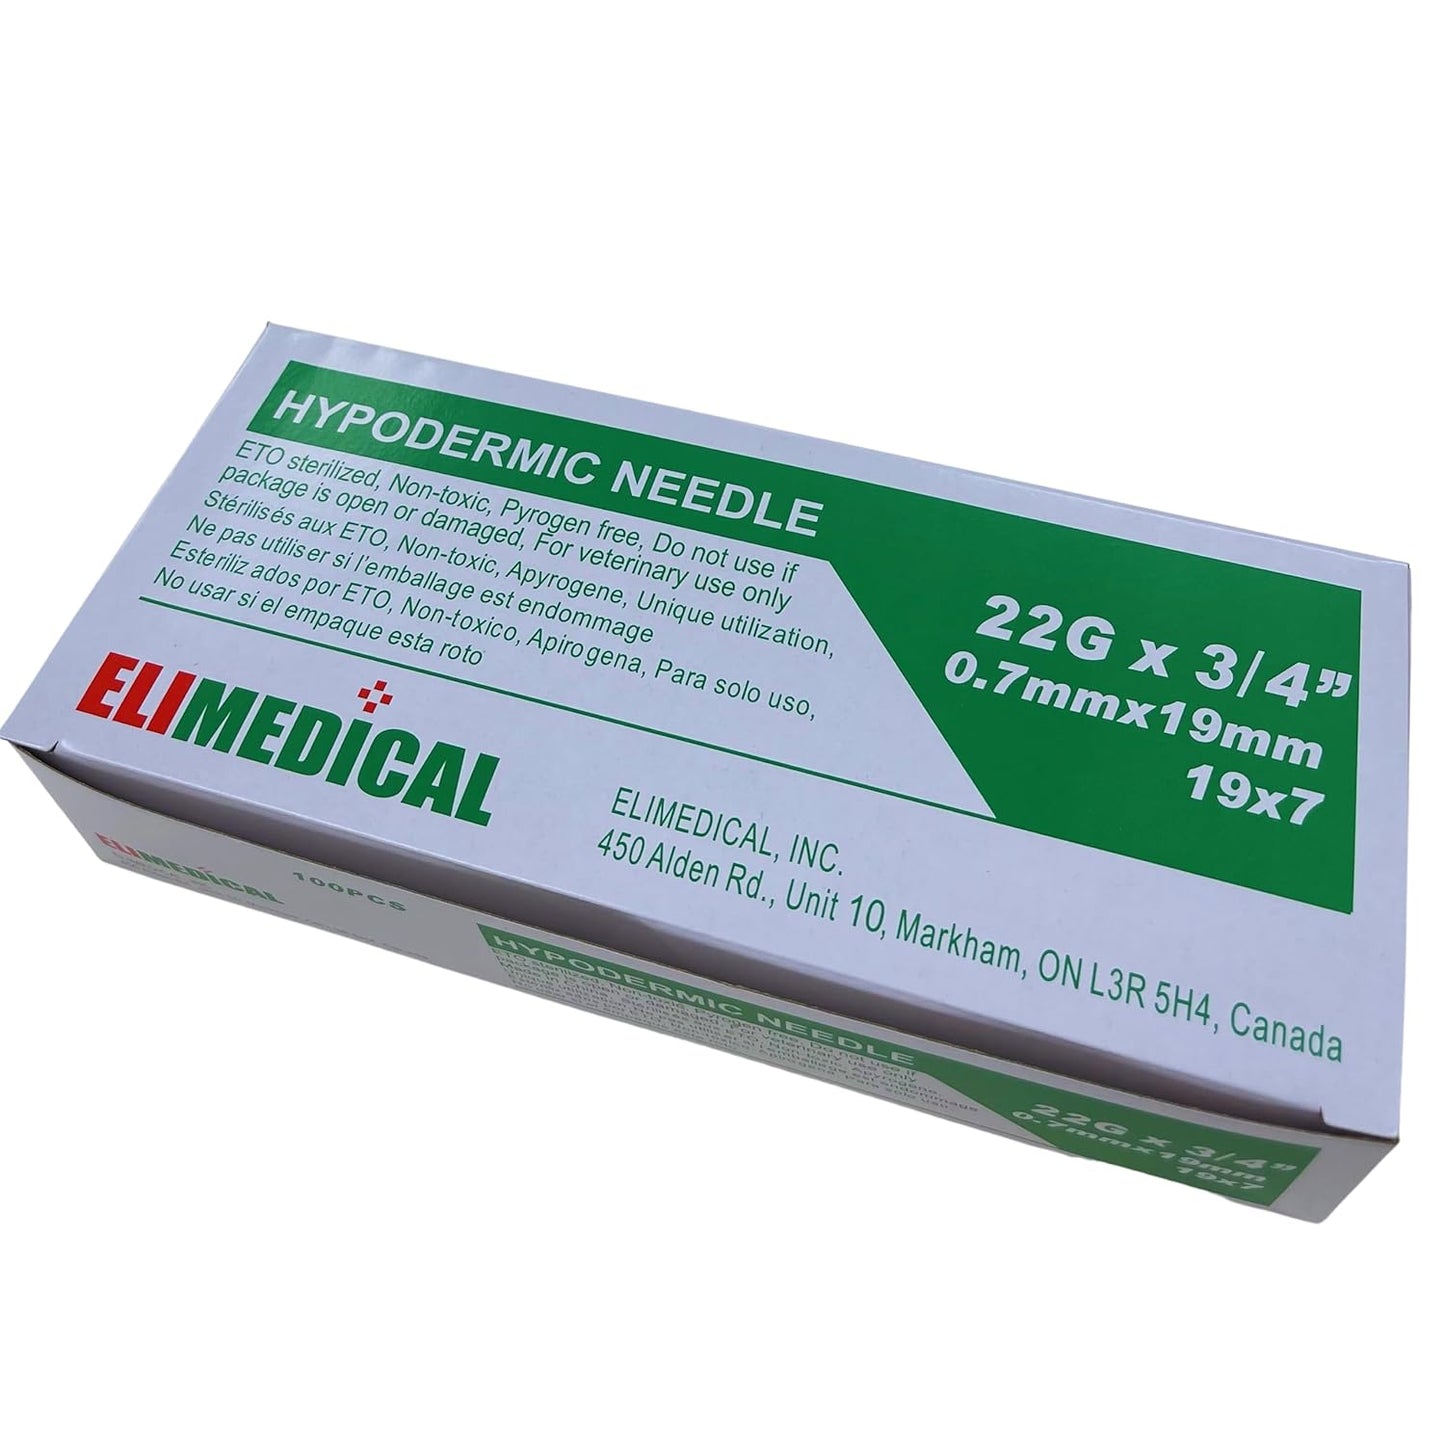 Elimedical, Veterinary Hypodermic Needle, Poly Hub 22G x 3/4 inch, 100 per Box, Individually Packed, NDL2219